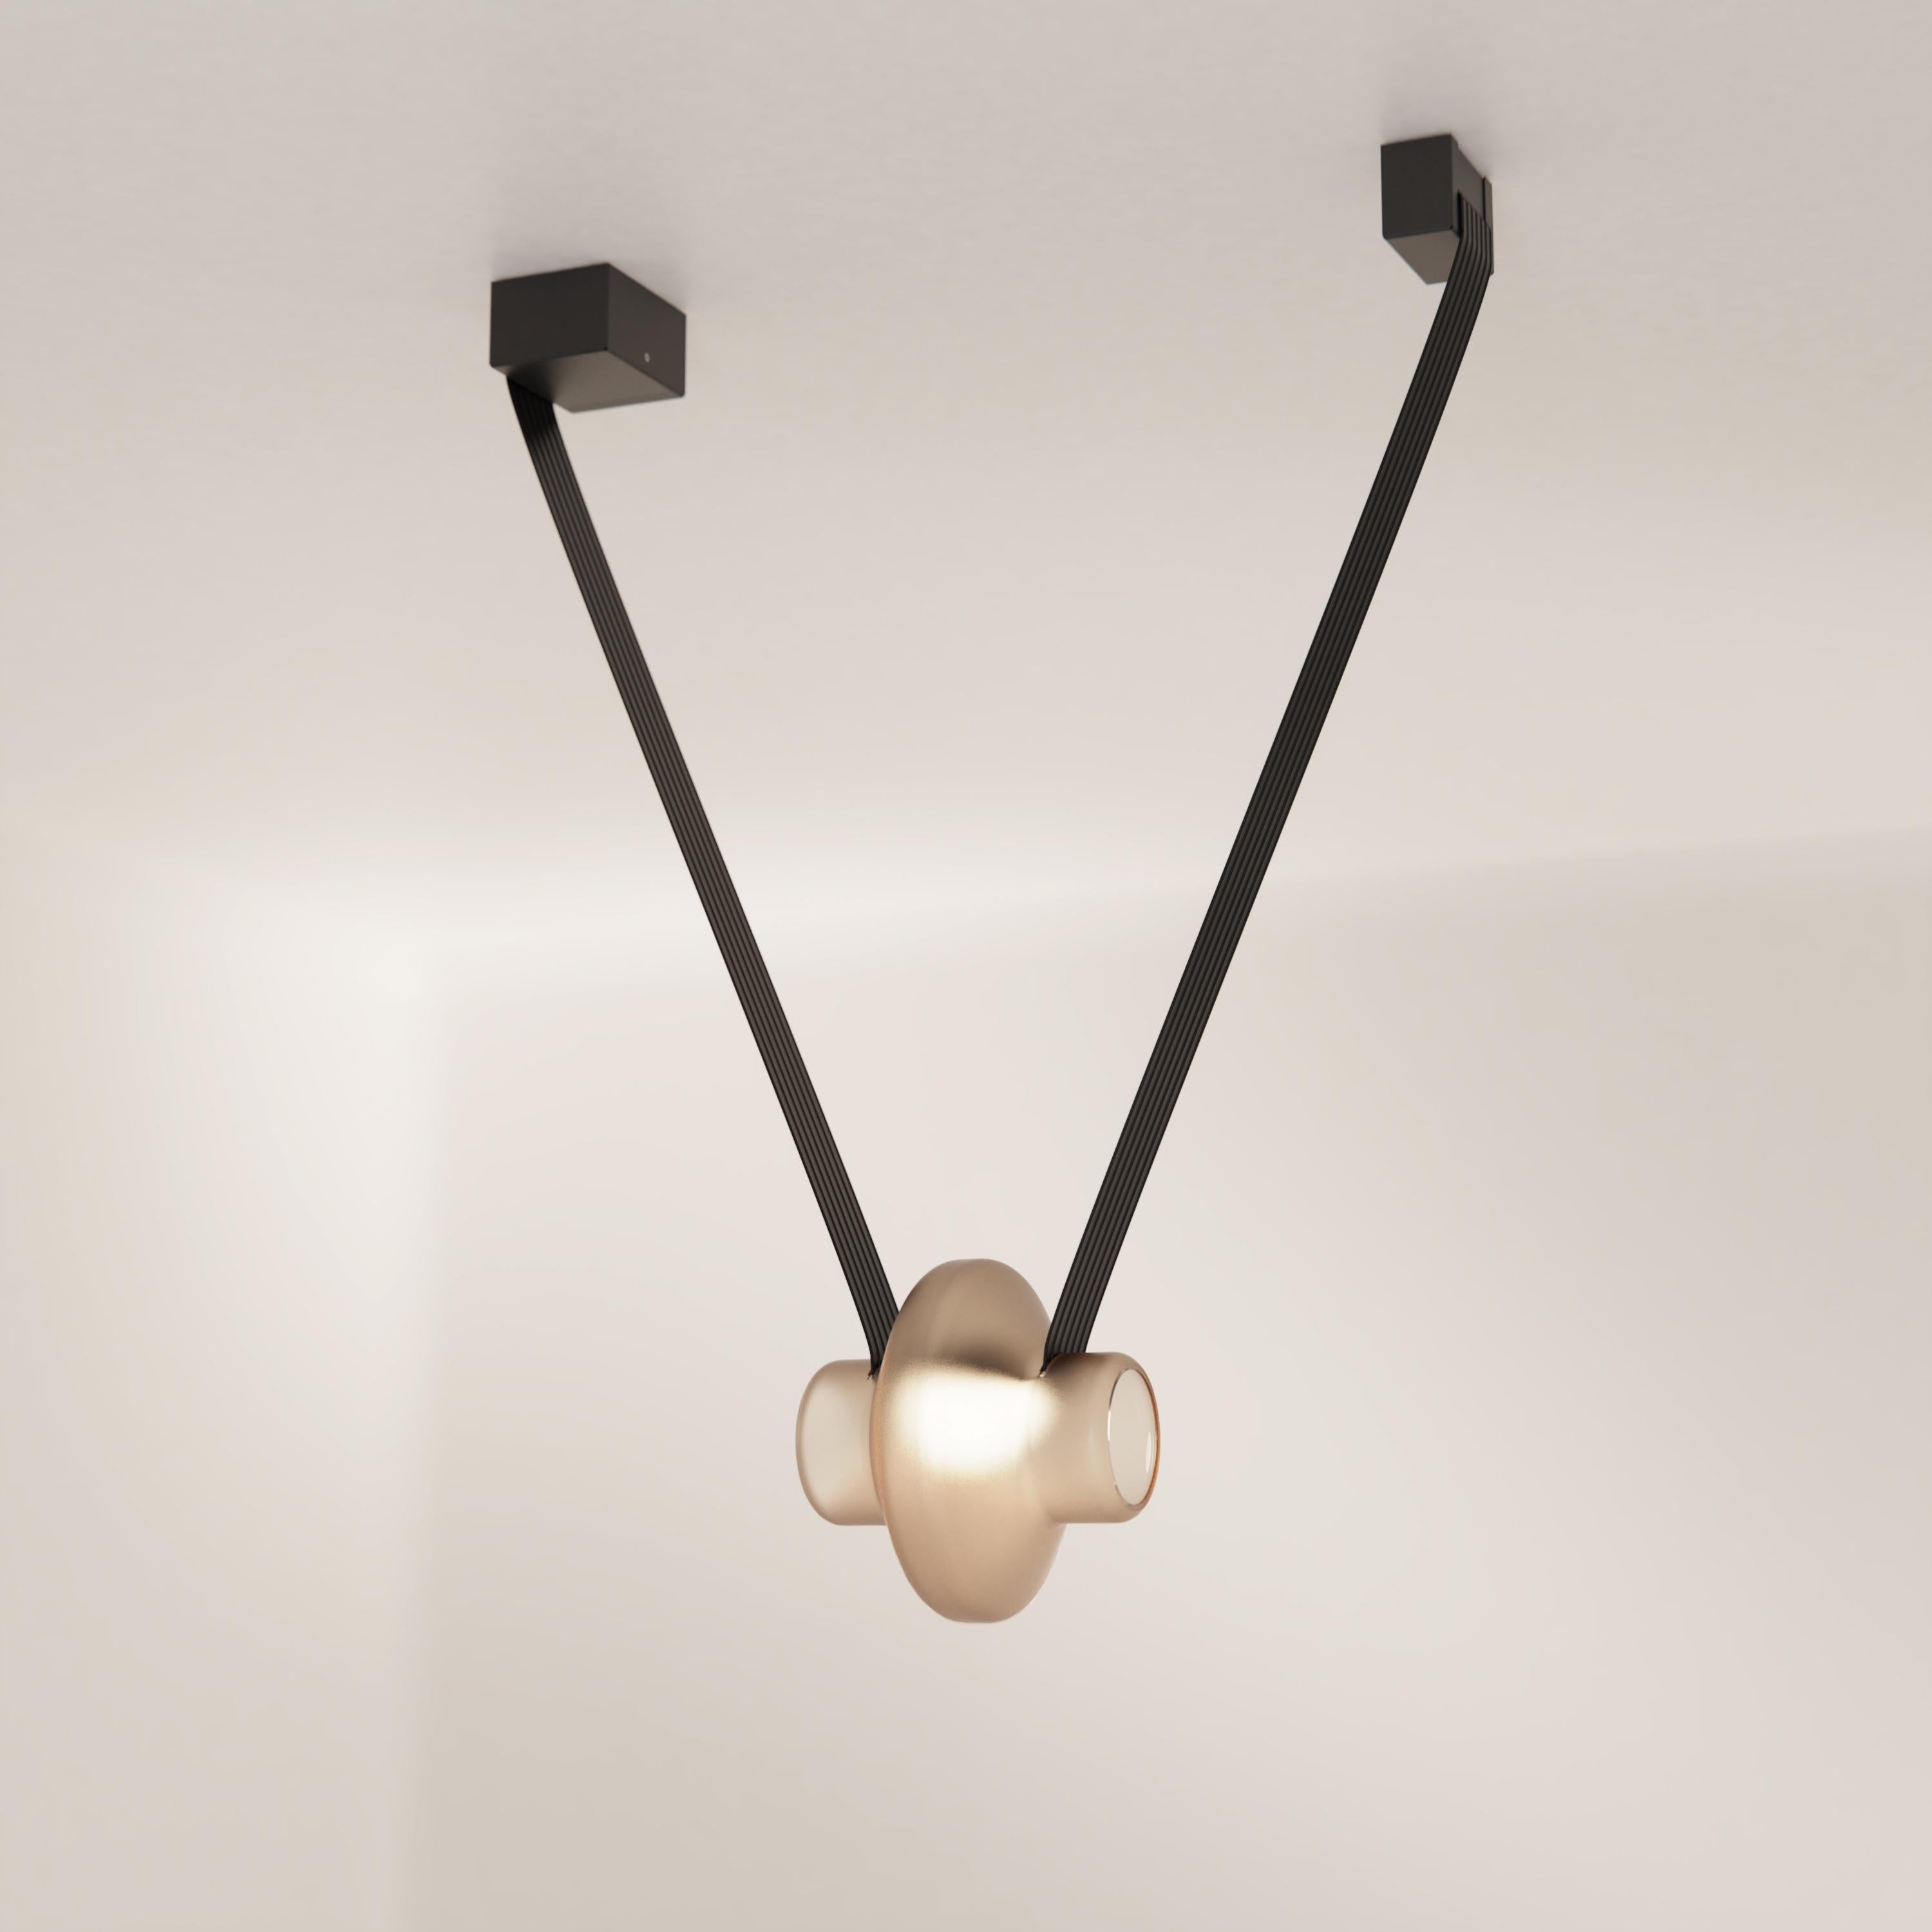 Etat-des-Lieux is a contemporary lighting system with an adaptive silhouette. The 1B configuration is a single pendant that can also be added to other modules to create a unique luminaire.

Etat-des-Lieux, a contemporary lighting system defined by